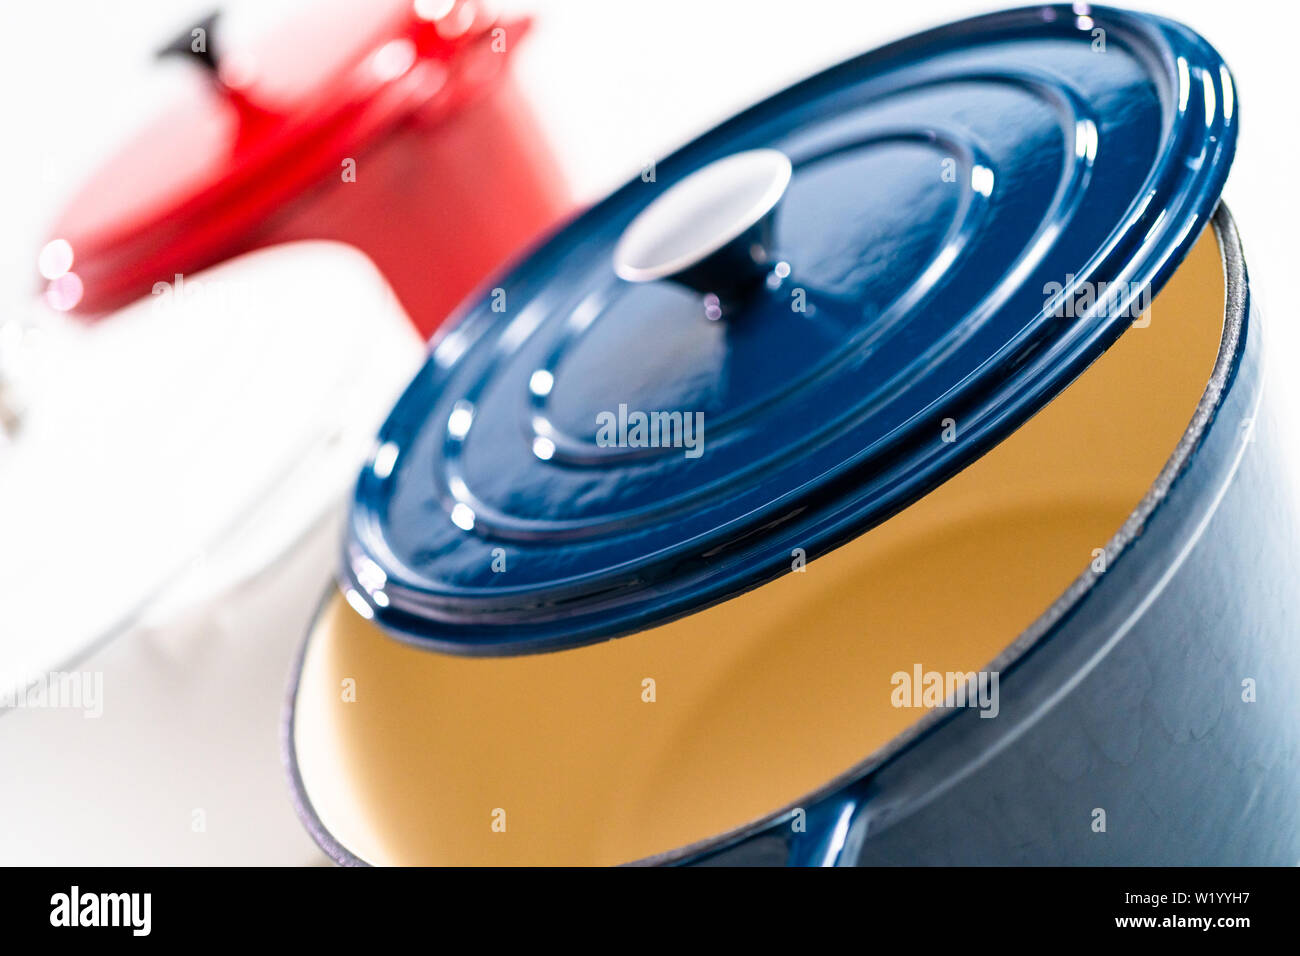 Red, white and blue enameled cast iron covered round dutch ovens on a whjite background. Stock Photo